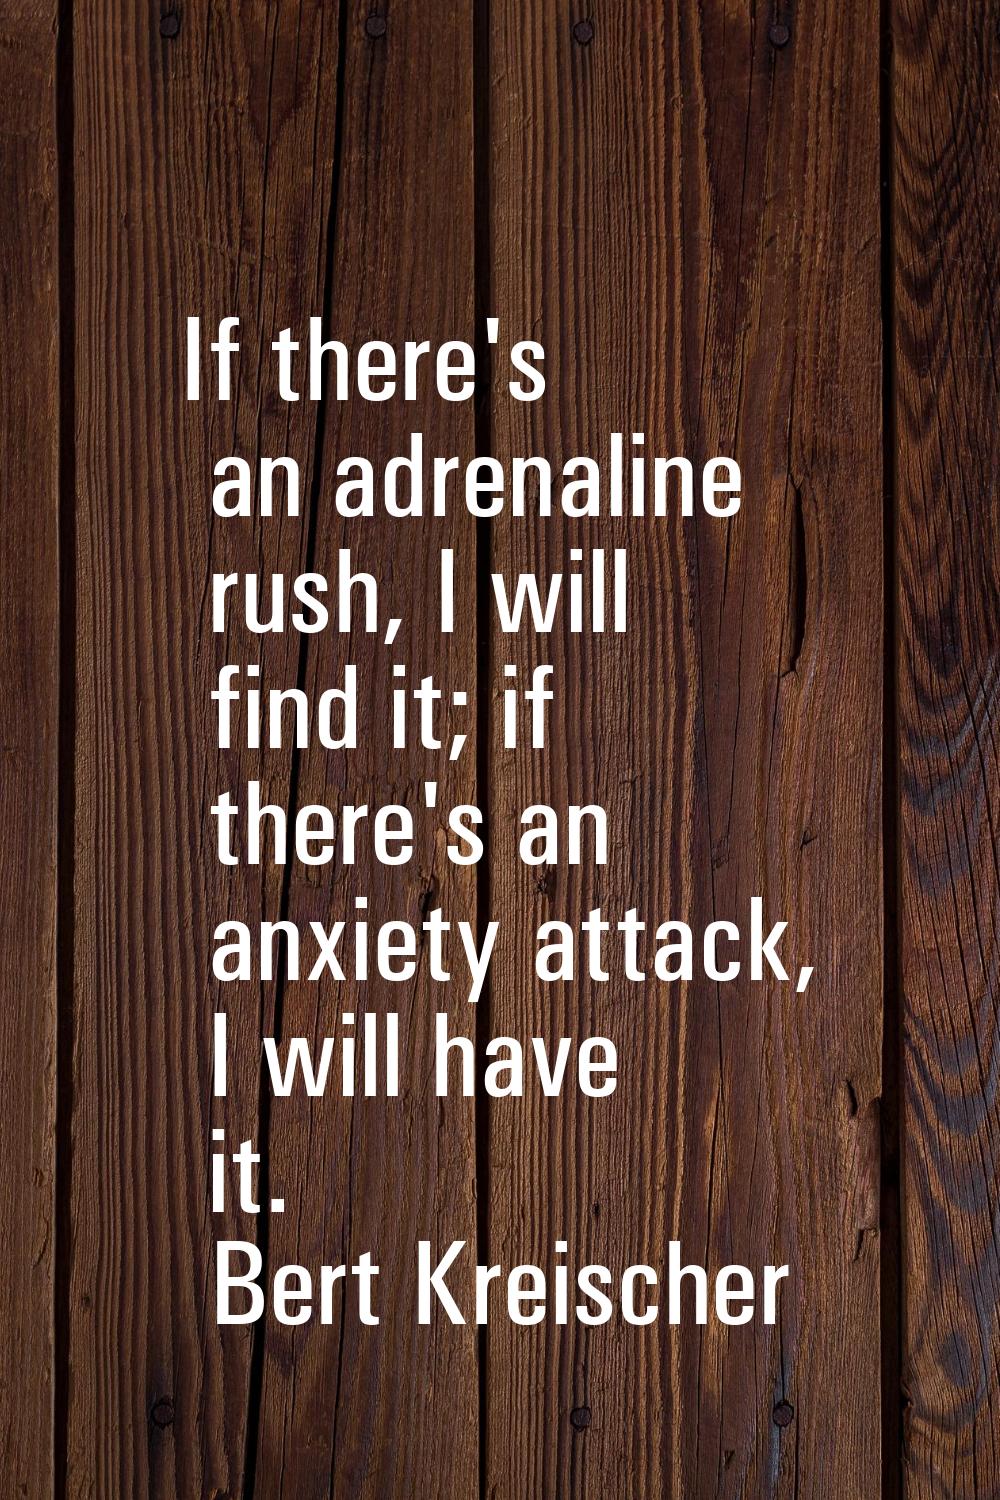 If there's an adrenaline rush, I will find it; if there's an anxiety attack, I will have it.